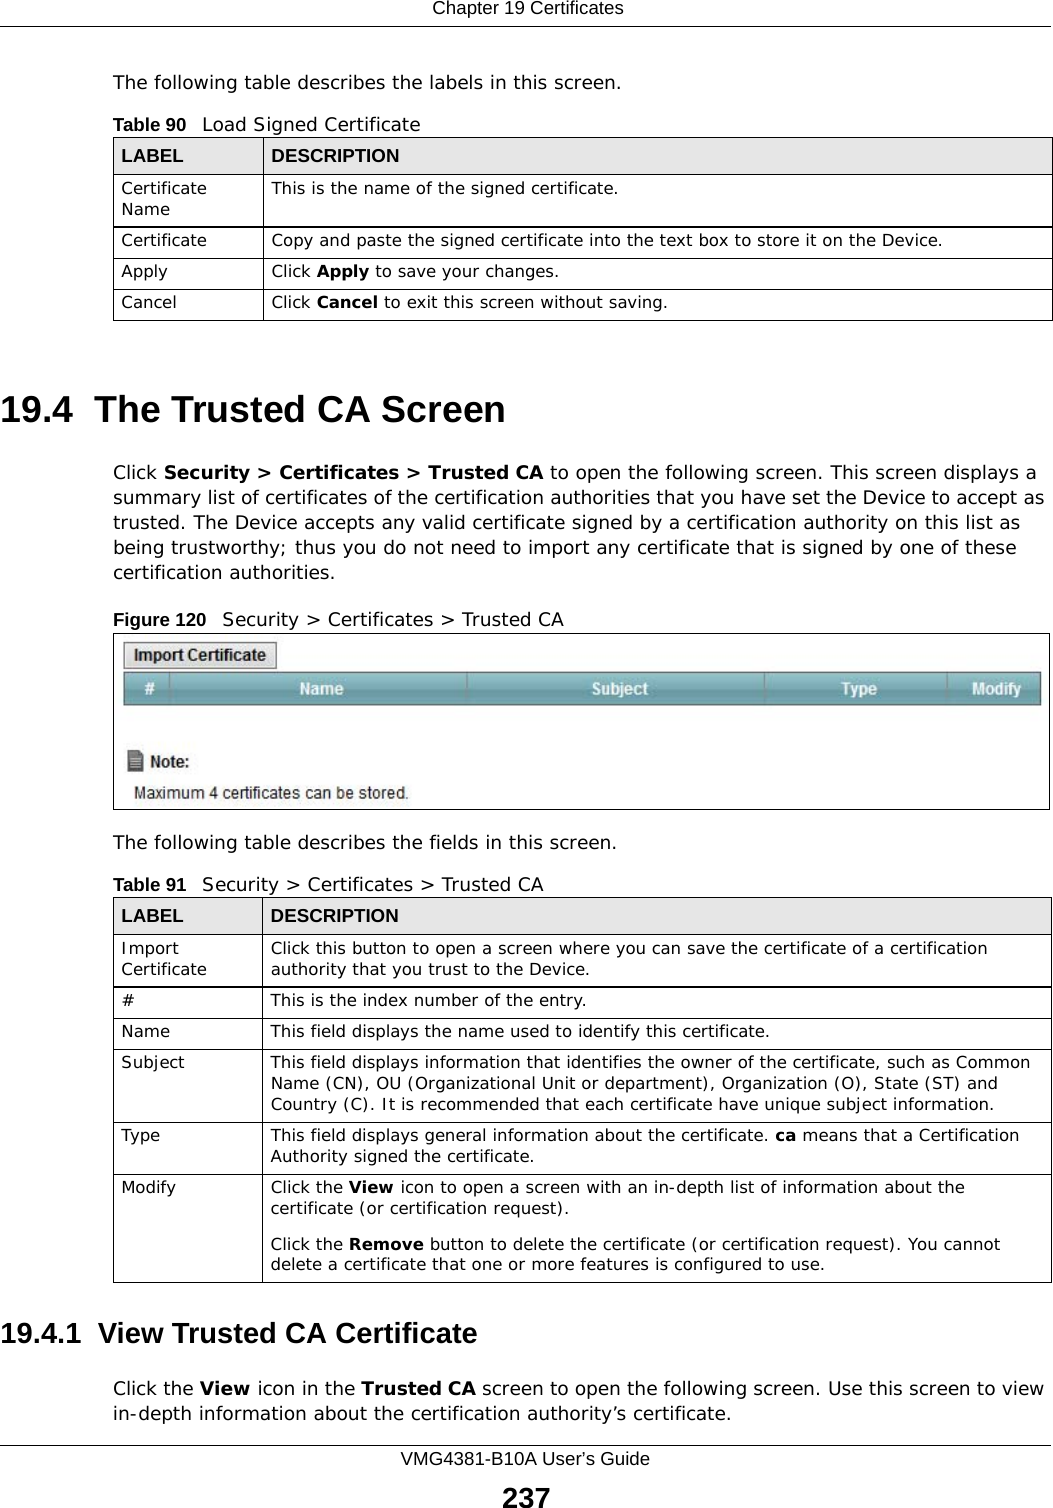  Chapter 19 CertificatesVMG4381-B10A User’s Guide237The following table describes the labels in this screen. 19.4  The Trusted CA ScreenClick Security &gt; Certificates &gt; Trusted CA to open the following screen. This screen displays a summary list of certificates of the certification authorities that you have set the Device to accept as trusted. The Device accepts any valid certificate signed by a certification authority on this list as being trustworthy; thus you do not need to import any certificate that is signed by one of these certification authorities. Figure 120   Security &gt; Certificates &gt; Trusted CA The following table describes the fields in this screen. 19.4.1  View Trusted CA CertificateClick the View icon in the Trusted CA screen to open the following screen. Use this screen to view in-depth information about the certification authority’s certificate.Table 90   Load Signed CertificateLABEL DESCRIPTIONCertificate Name This is the name of the signed certificate. Certificate Copy and paste the signed certificate into the text box to store it on the Device.Apply Click Apply to save your changes.Cancel Click Cancel to exit this screen without saving.Table 91   Security &gt; Certificates &gt; Trusted CALABEL DESCRIPTIONImport Certificate Click this button to open a screen where you can save the certificate of a certification authority that you trust to the Device.# This is the index number of the entry.Name This field displays the name used to identify this certificate. Subject This field displays information that identifies the owner of the certificate, such as Common Name (CN), OU (Organizational Unit or department), Organization (O), State (ST) and Country (C). It is recommended that each certificate have unique subject information.Type This field displays general information about the certificate. ca means that a Certification Authority signed the certificate. Modify Click the View icon to open a screen with an in-depth list of information about the certificate (or certification request).Click the Remove button to delete the certificate (or certification request). You cannot delete a certificate that one or more features is configured to use.